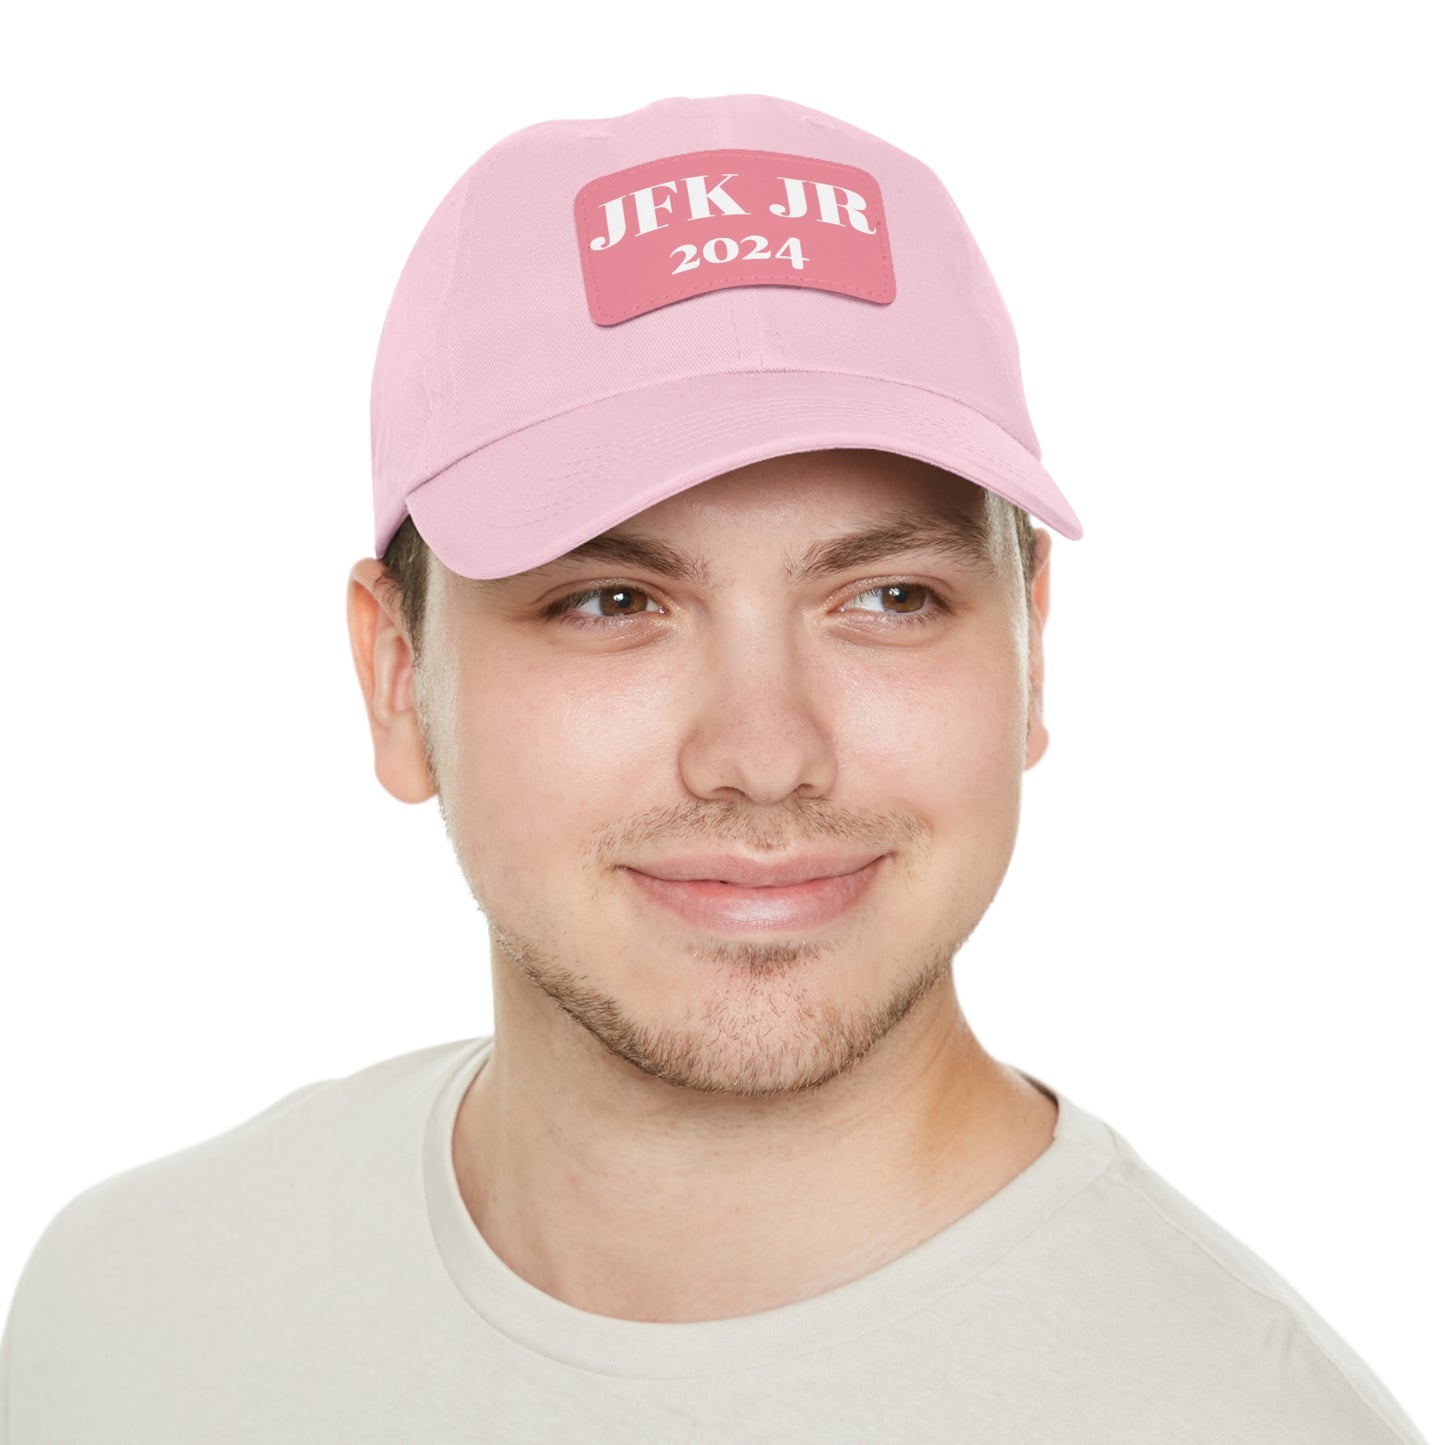 JFK JR 2024 Dad Hat with Leather Patch (Rectangle)